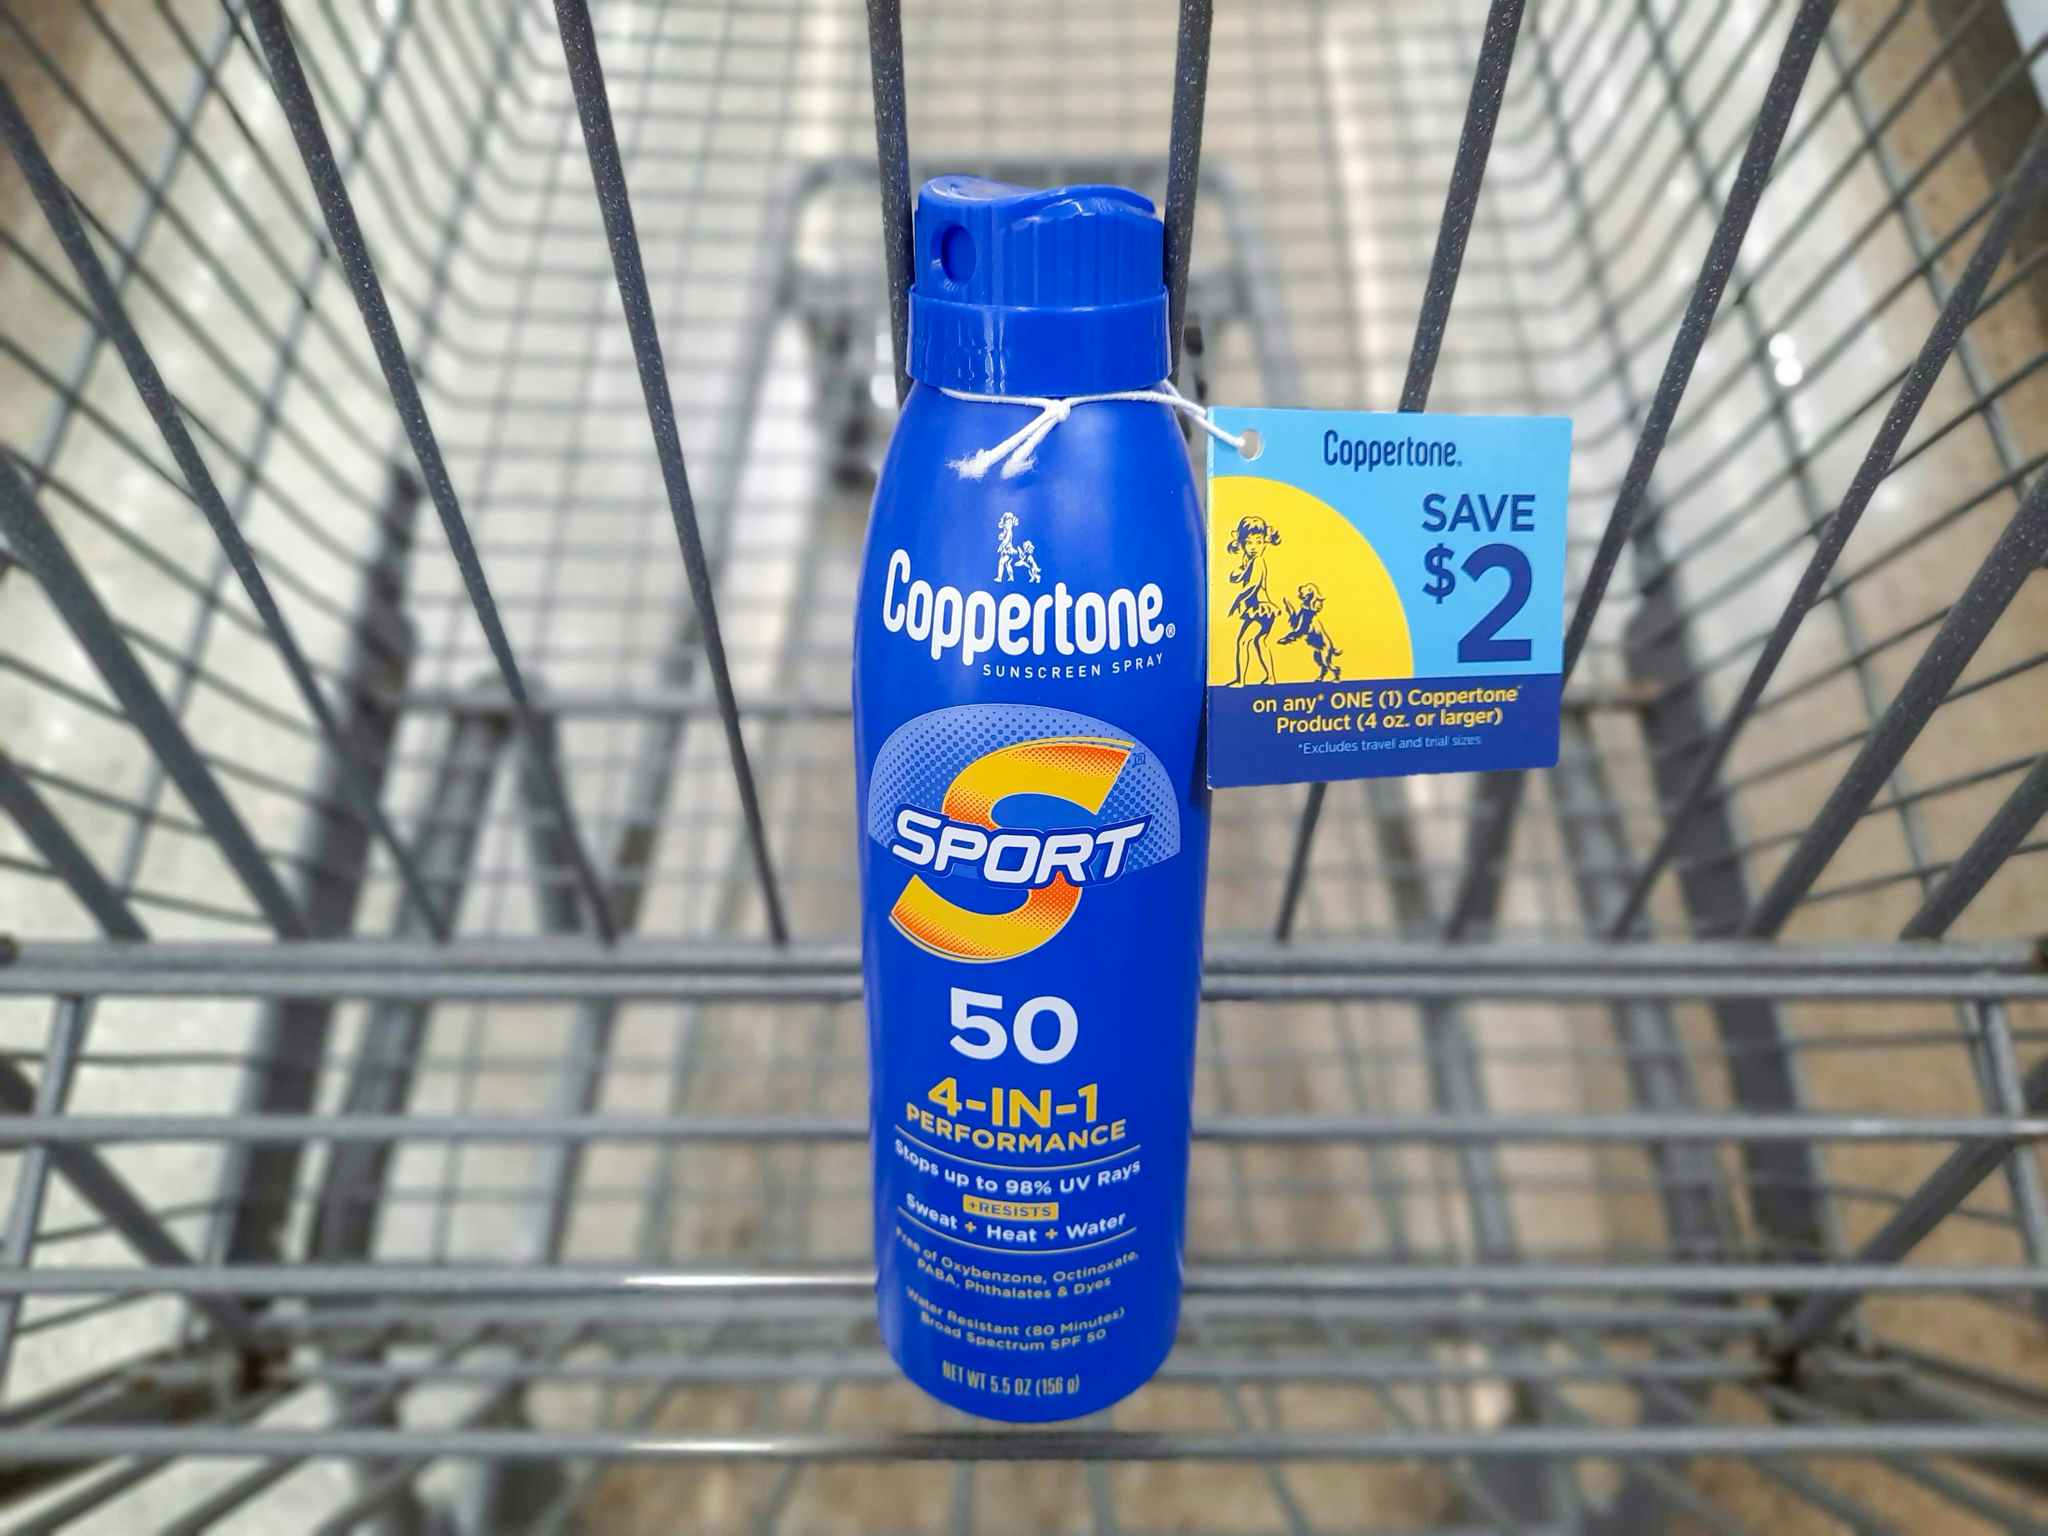 Coppertone Sport Sunscreen product in Walmart shopping cart. A $2 hangtag coupon is attached to the product.